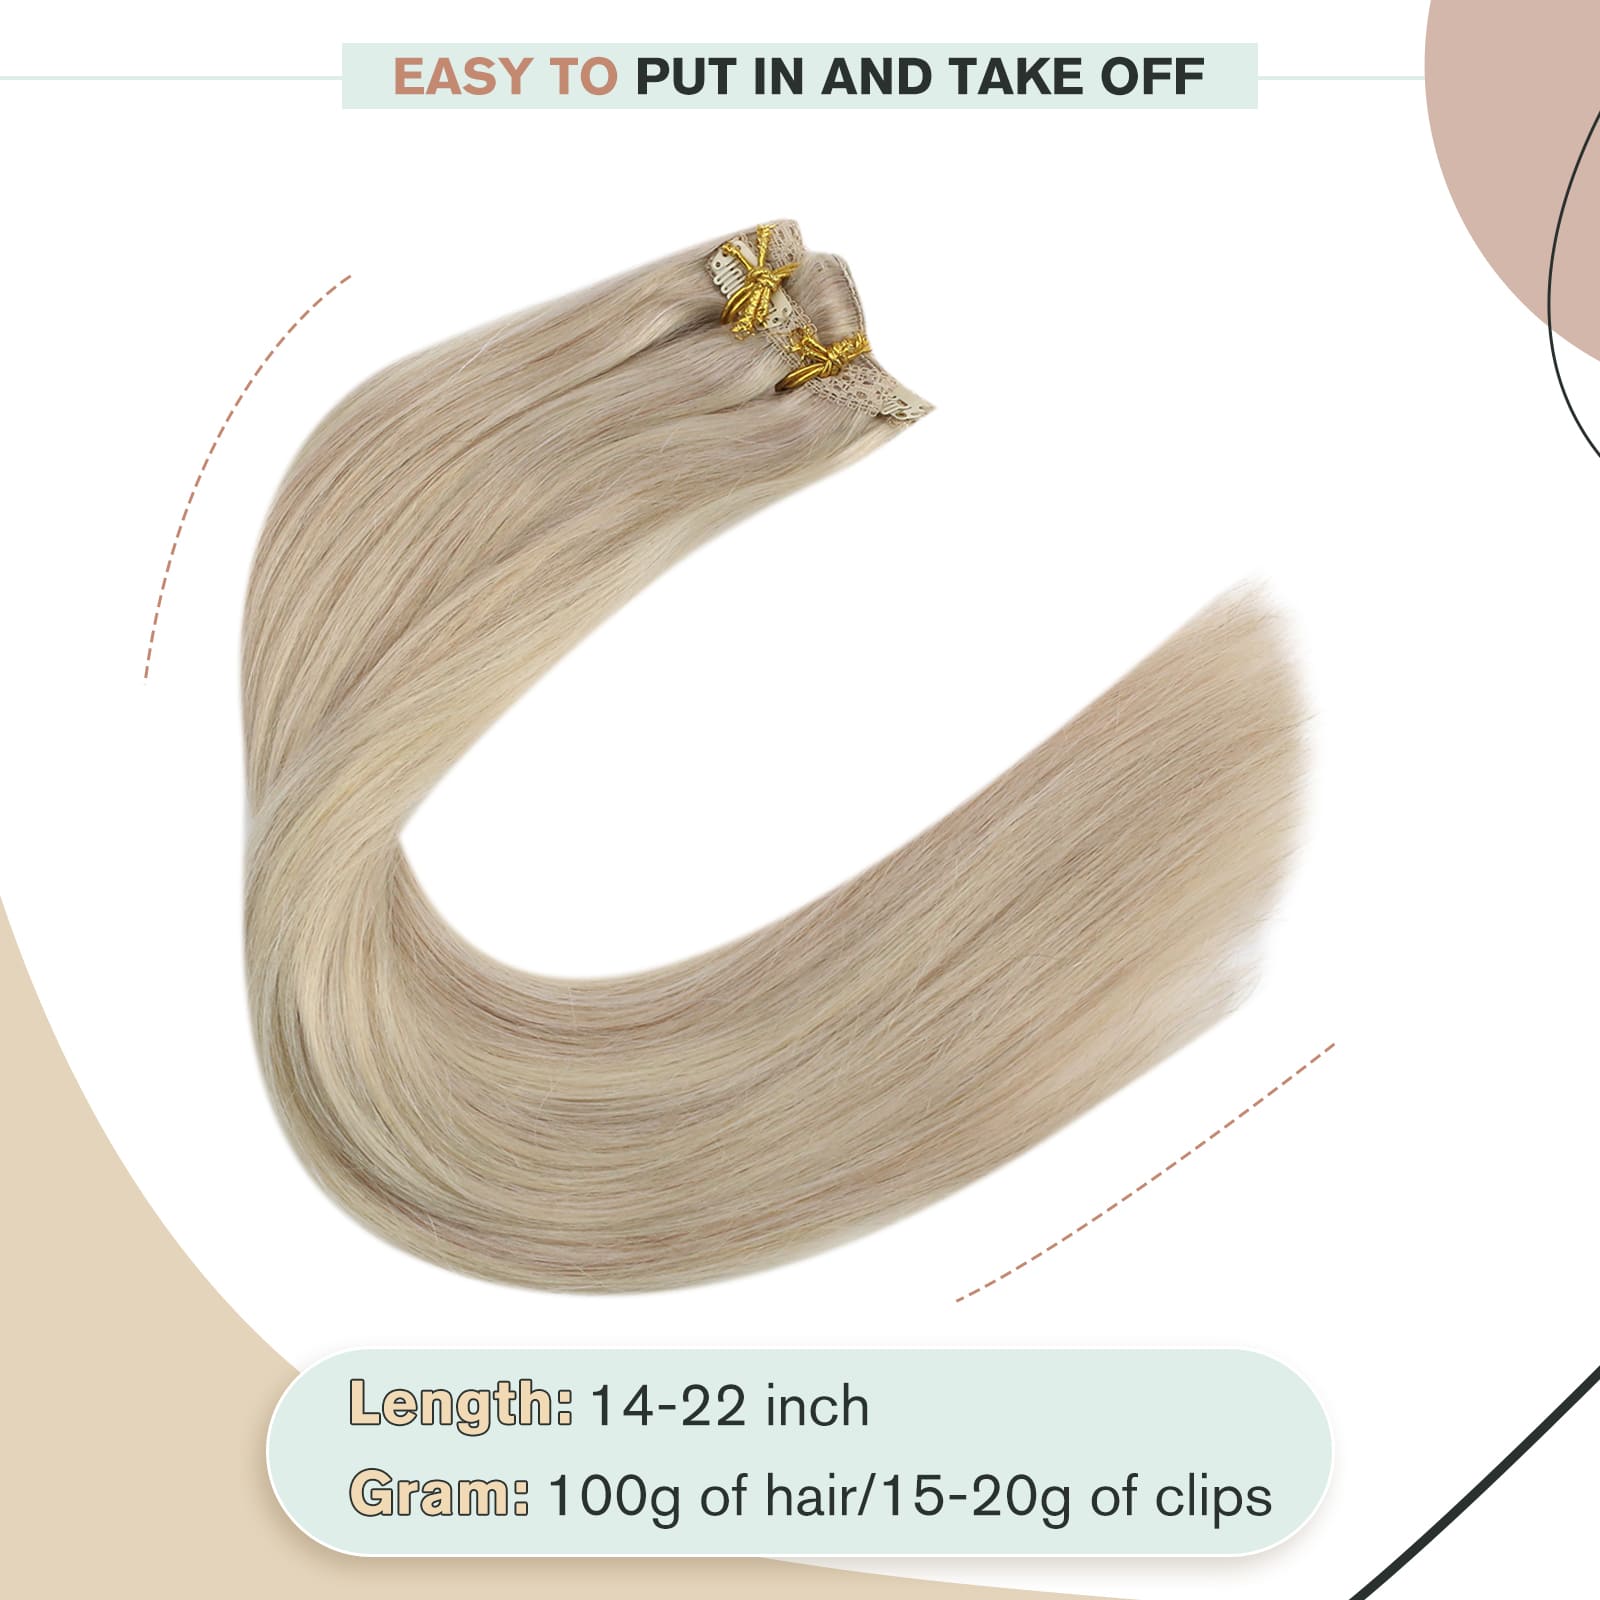 real human hair extensions clip in blonde